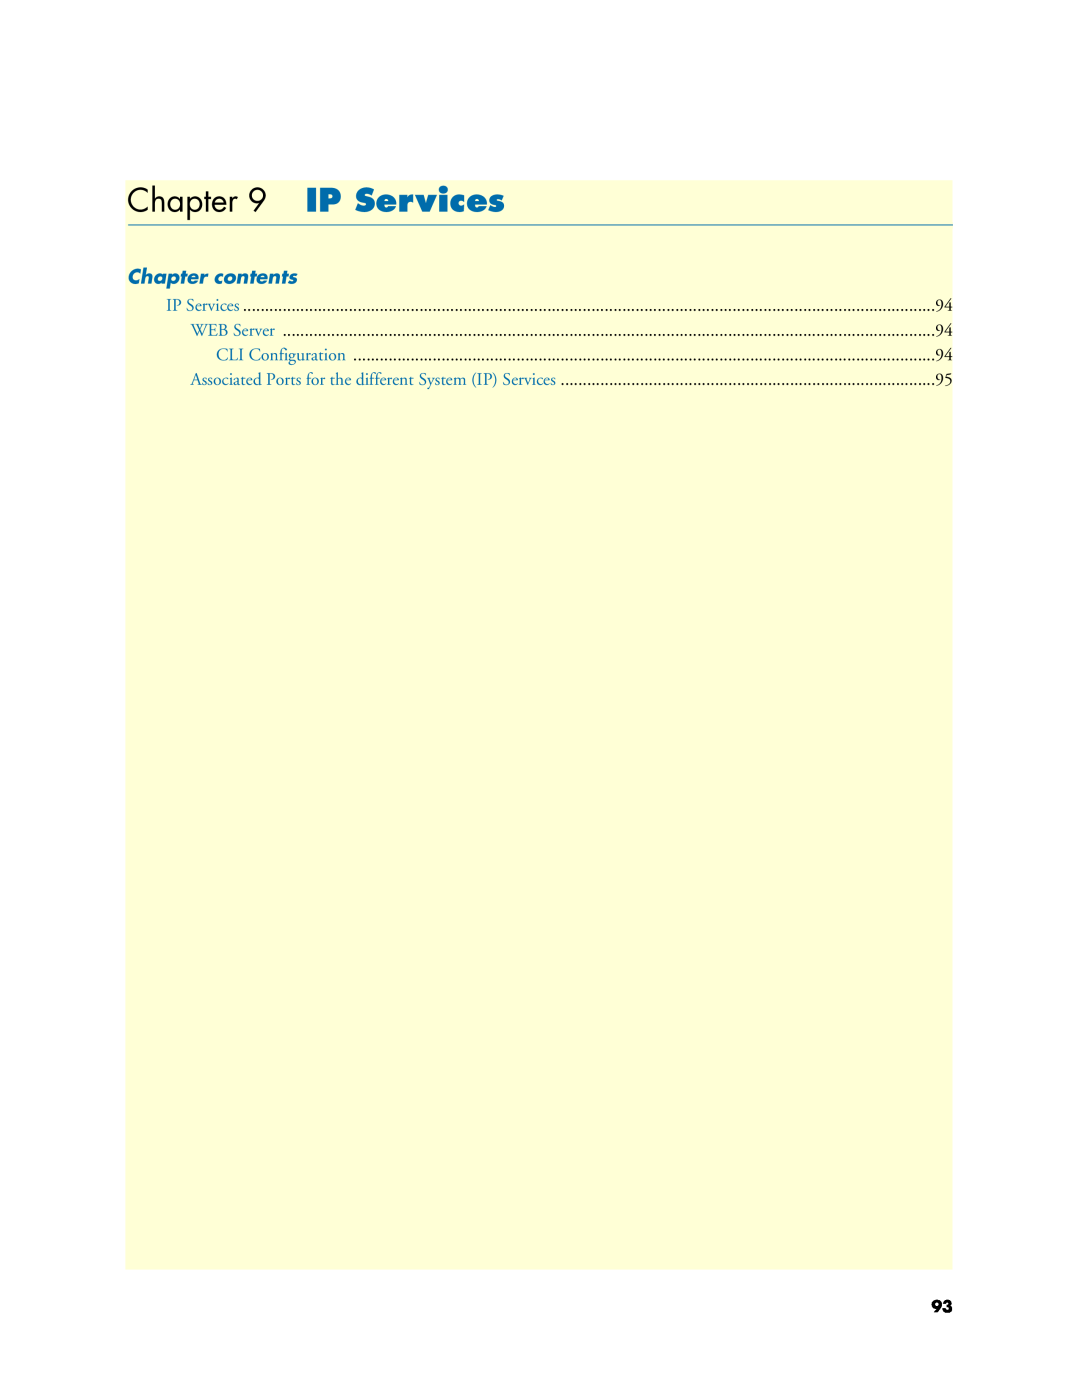 Patton electronic 2635, 2621 manual IP Services, Chapter contents, WEB Server, CLI Configuration 